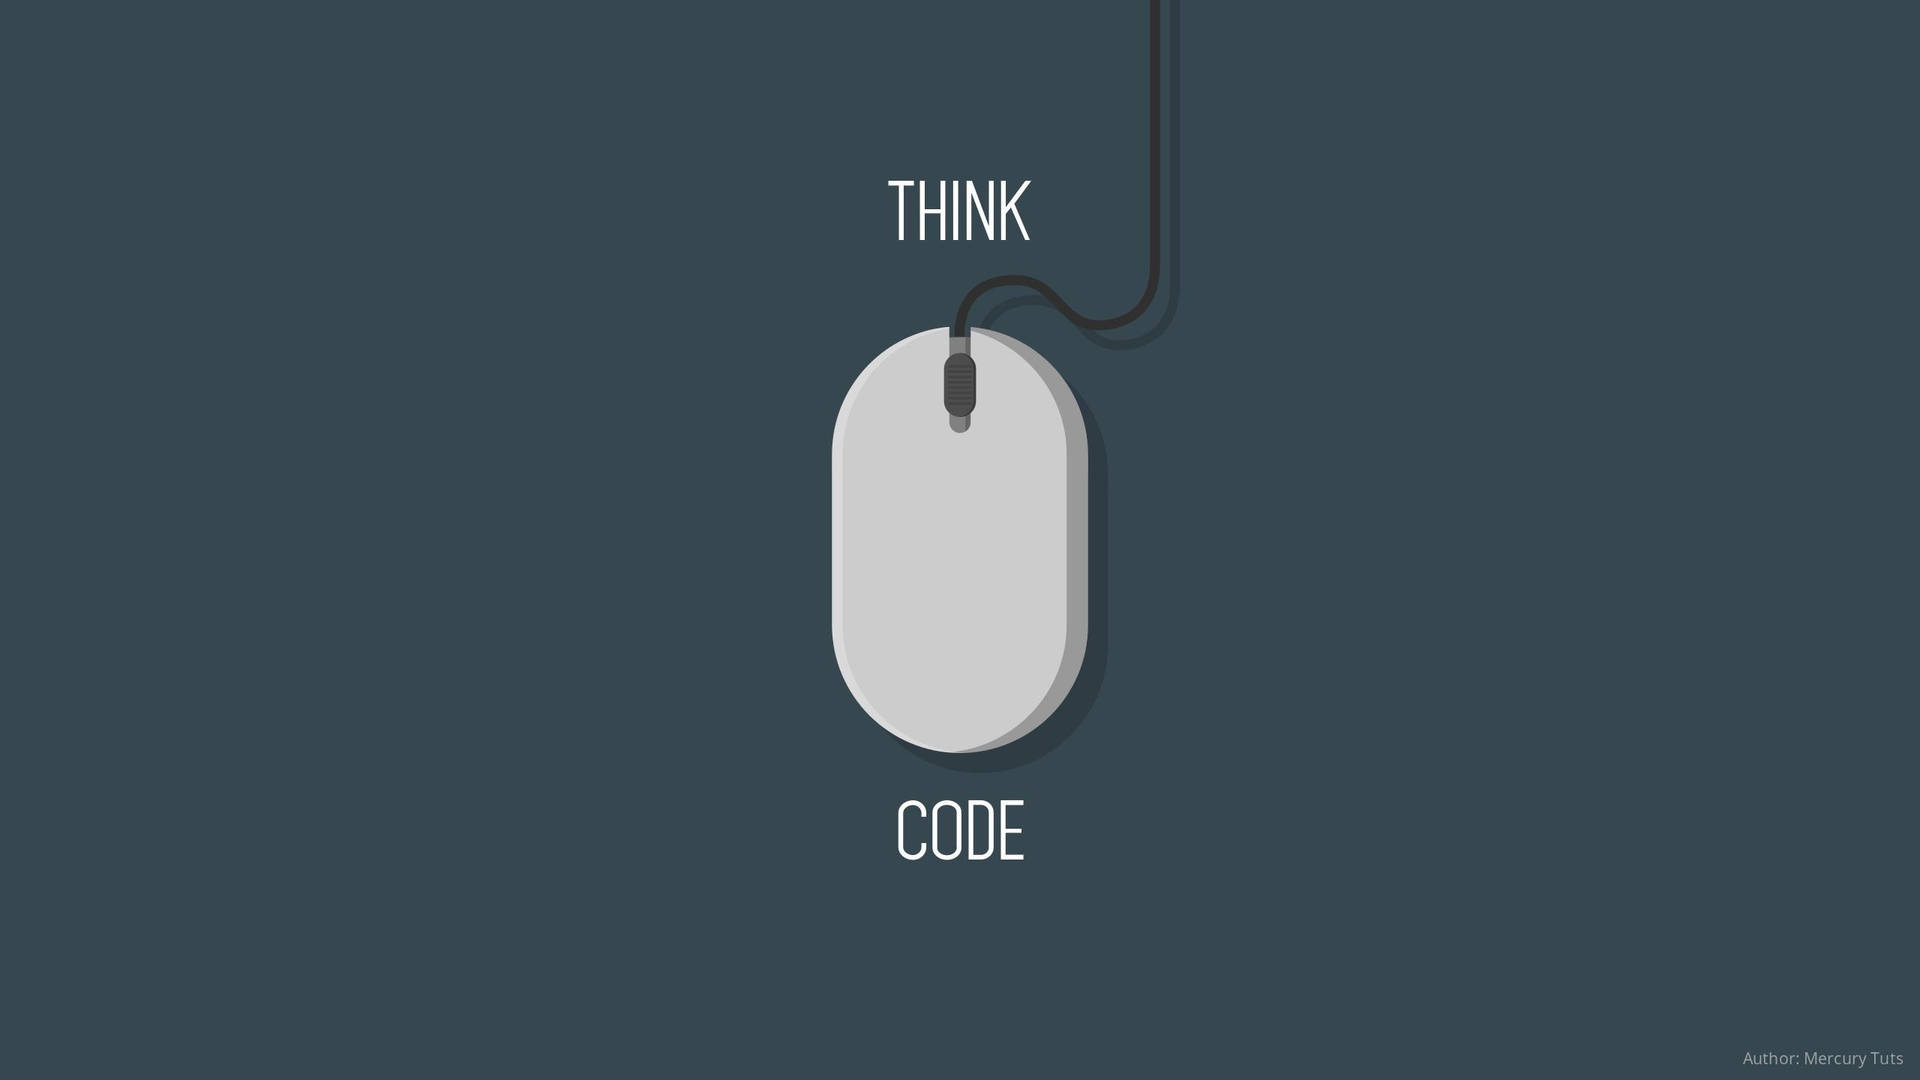 Free Coding Wallpaper Downloads, [200+] Coding Wallpapers for FREE |  